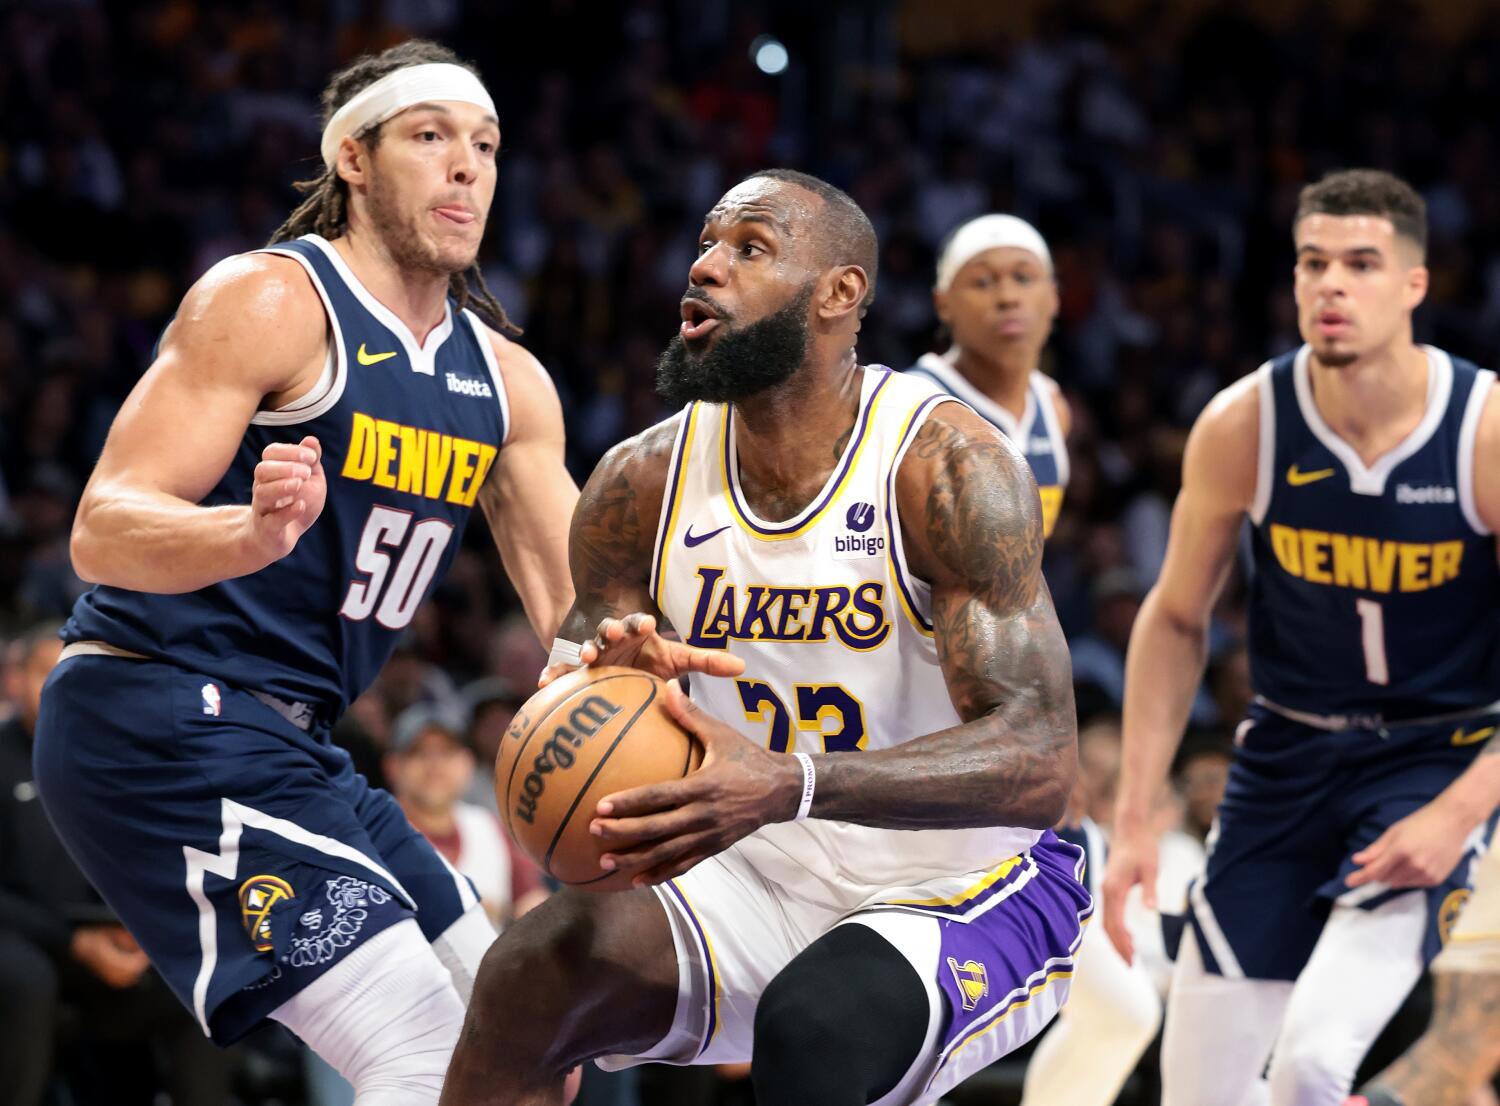 Lakers defeat Nuggets to avoid elimination: 'We've given ourselves another life'